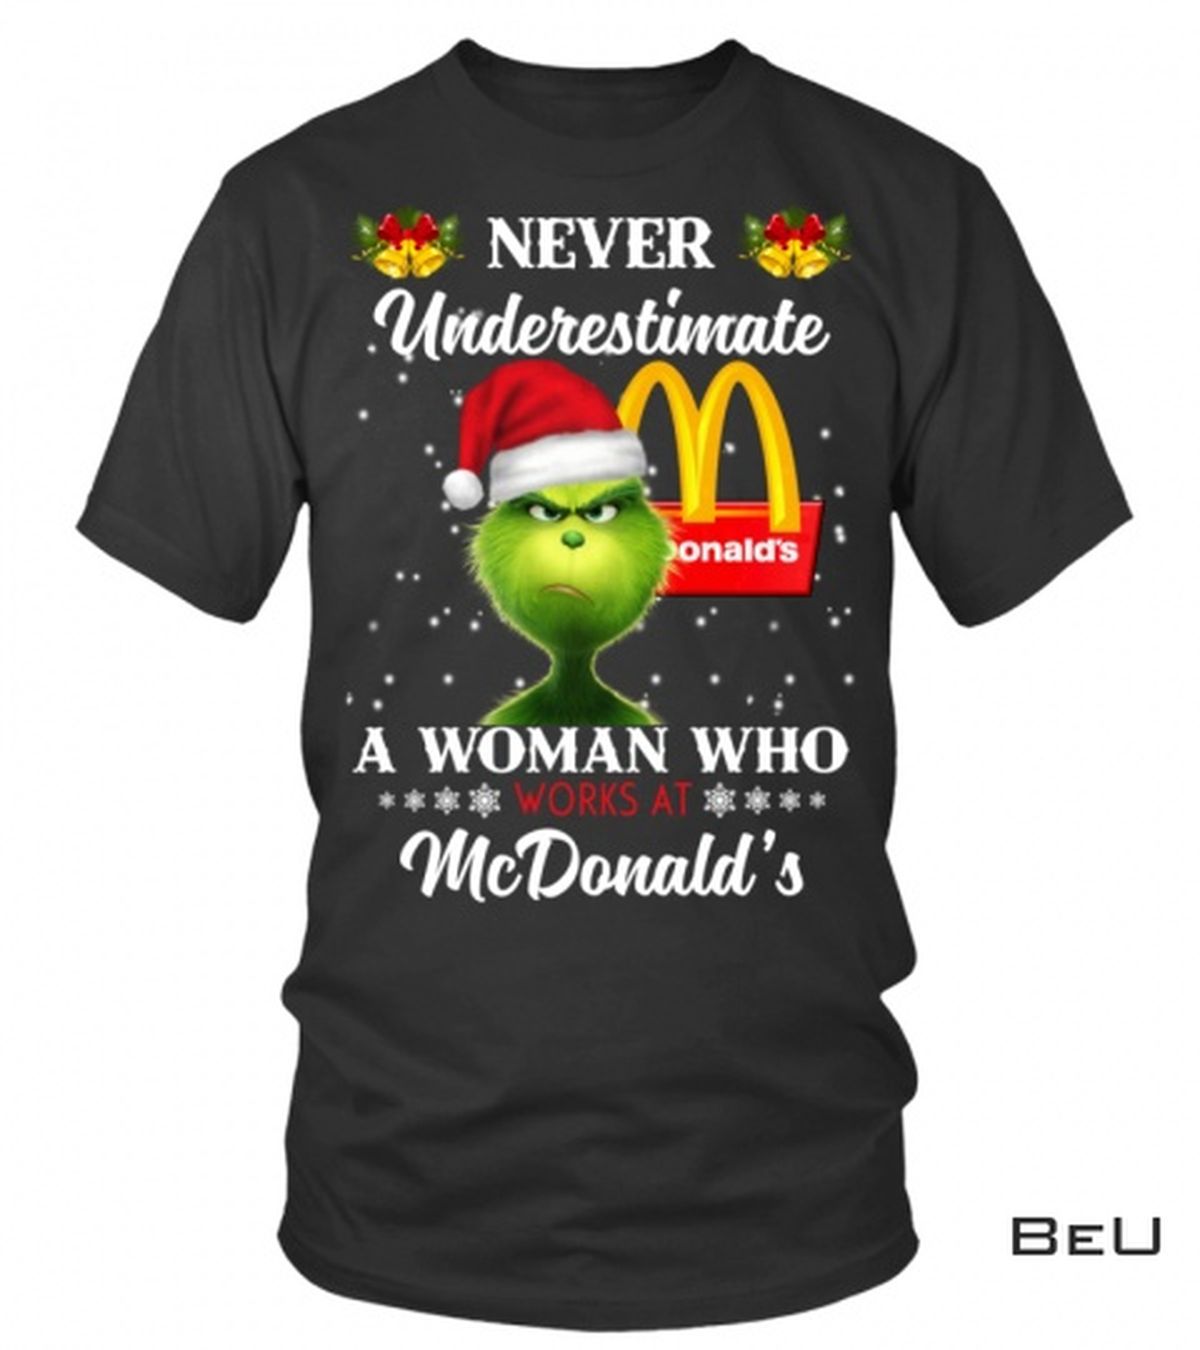 The Grinch Never Underestimate A Woman Who Works At Mcdonald's Shirt